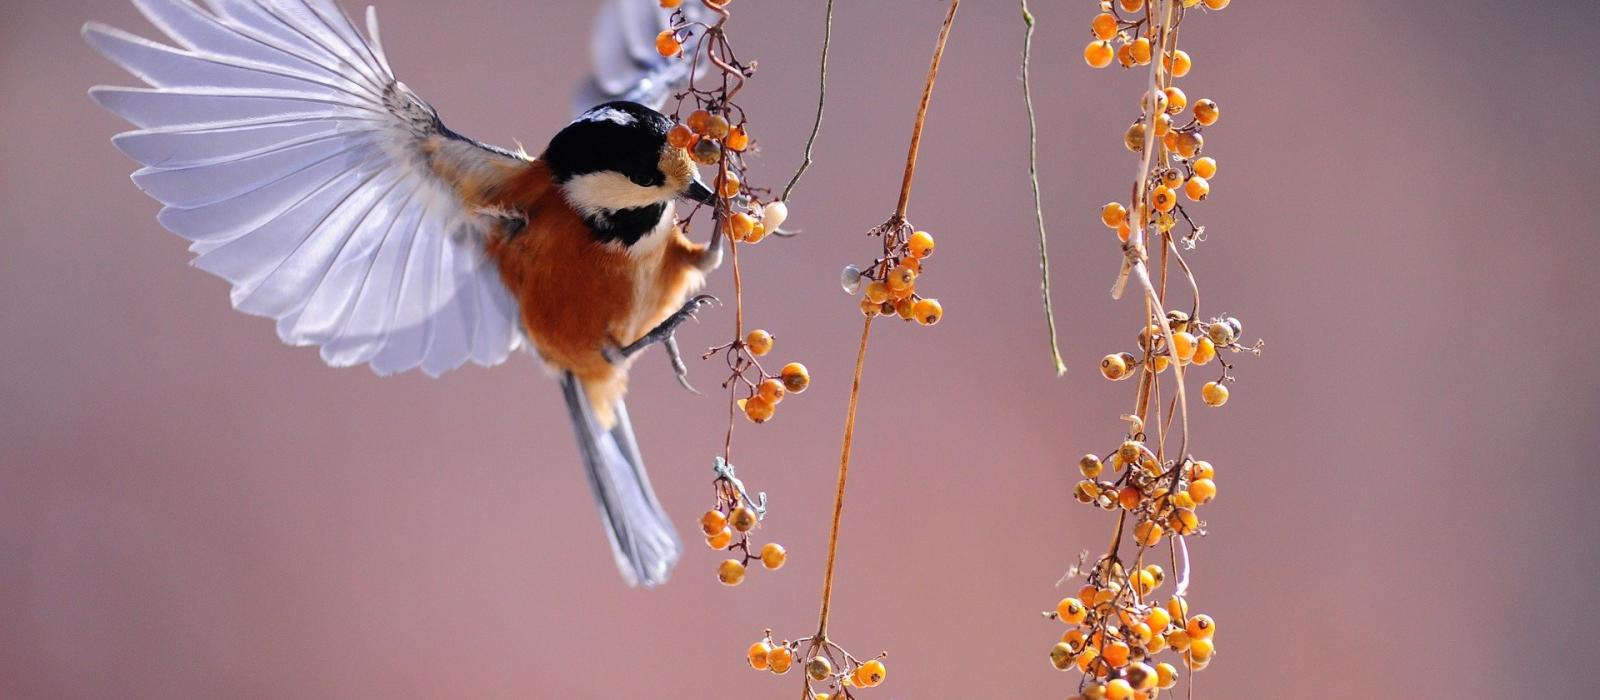 A flying bird on a hanging stem of berries